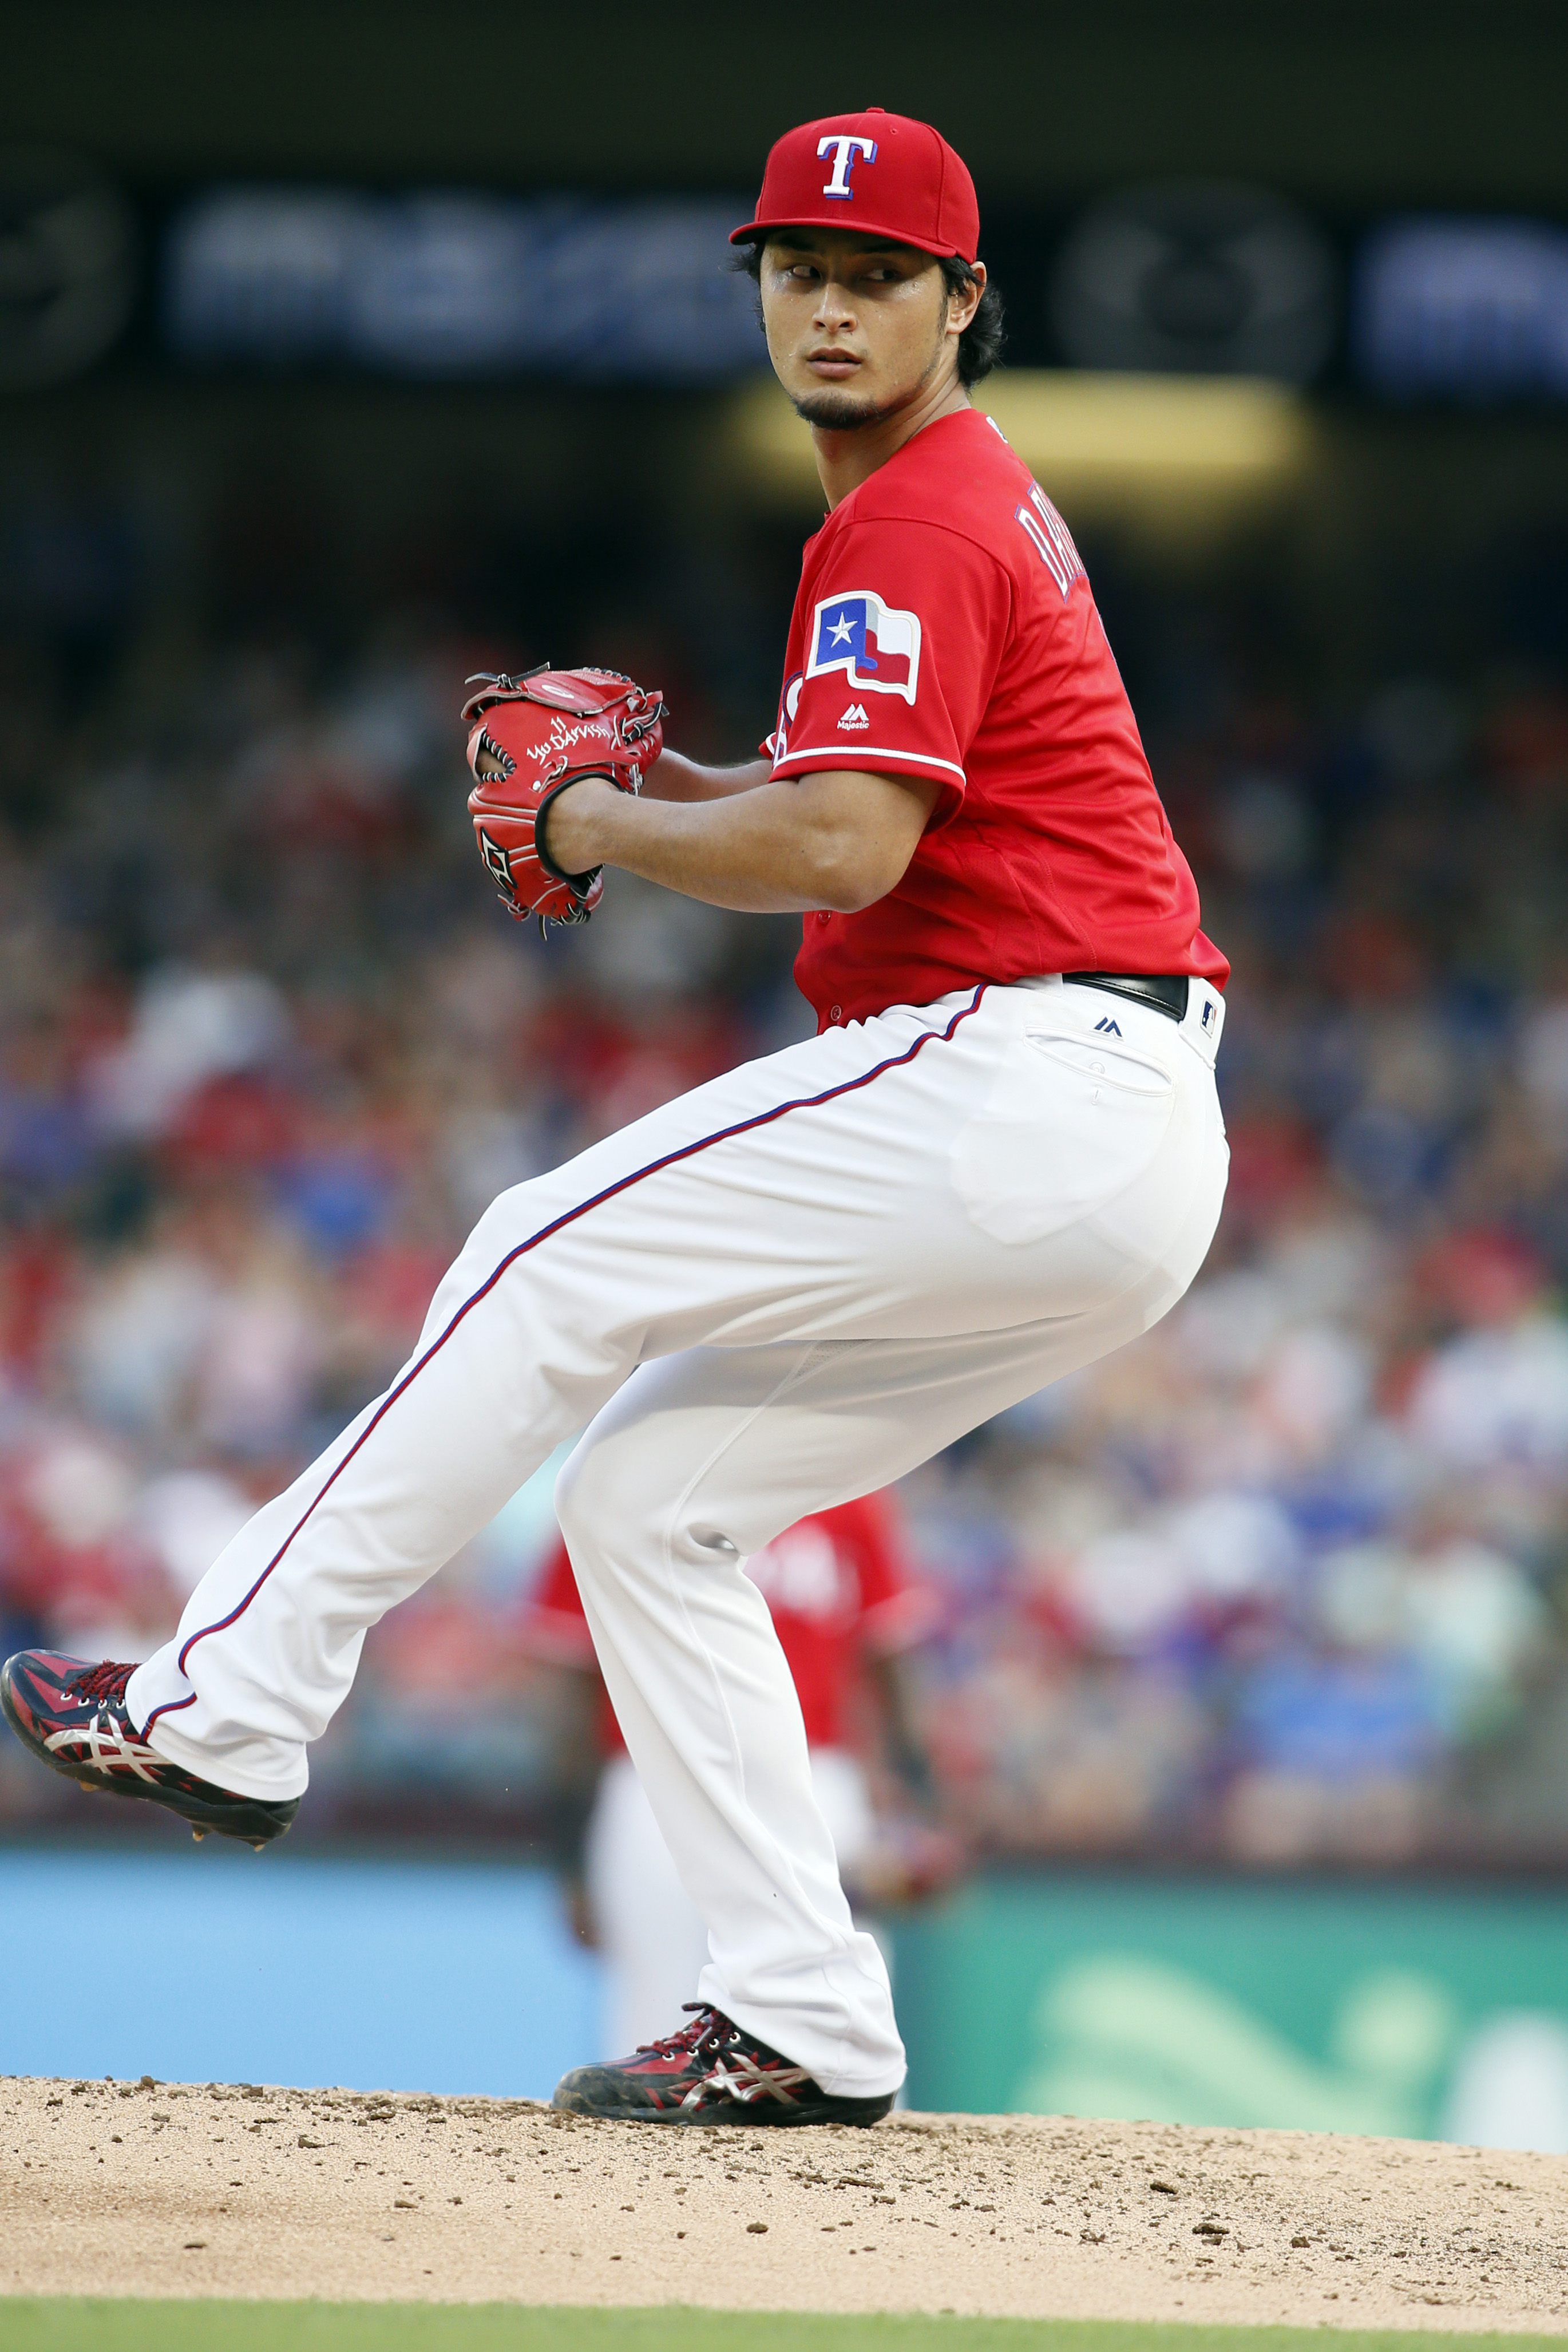 Rangers pitcher Yu Darvish comes within 1 out of Perfect Game